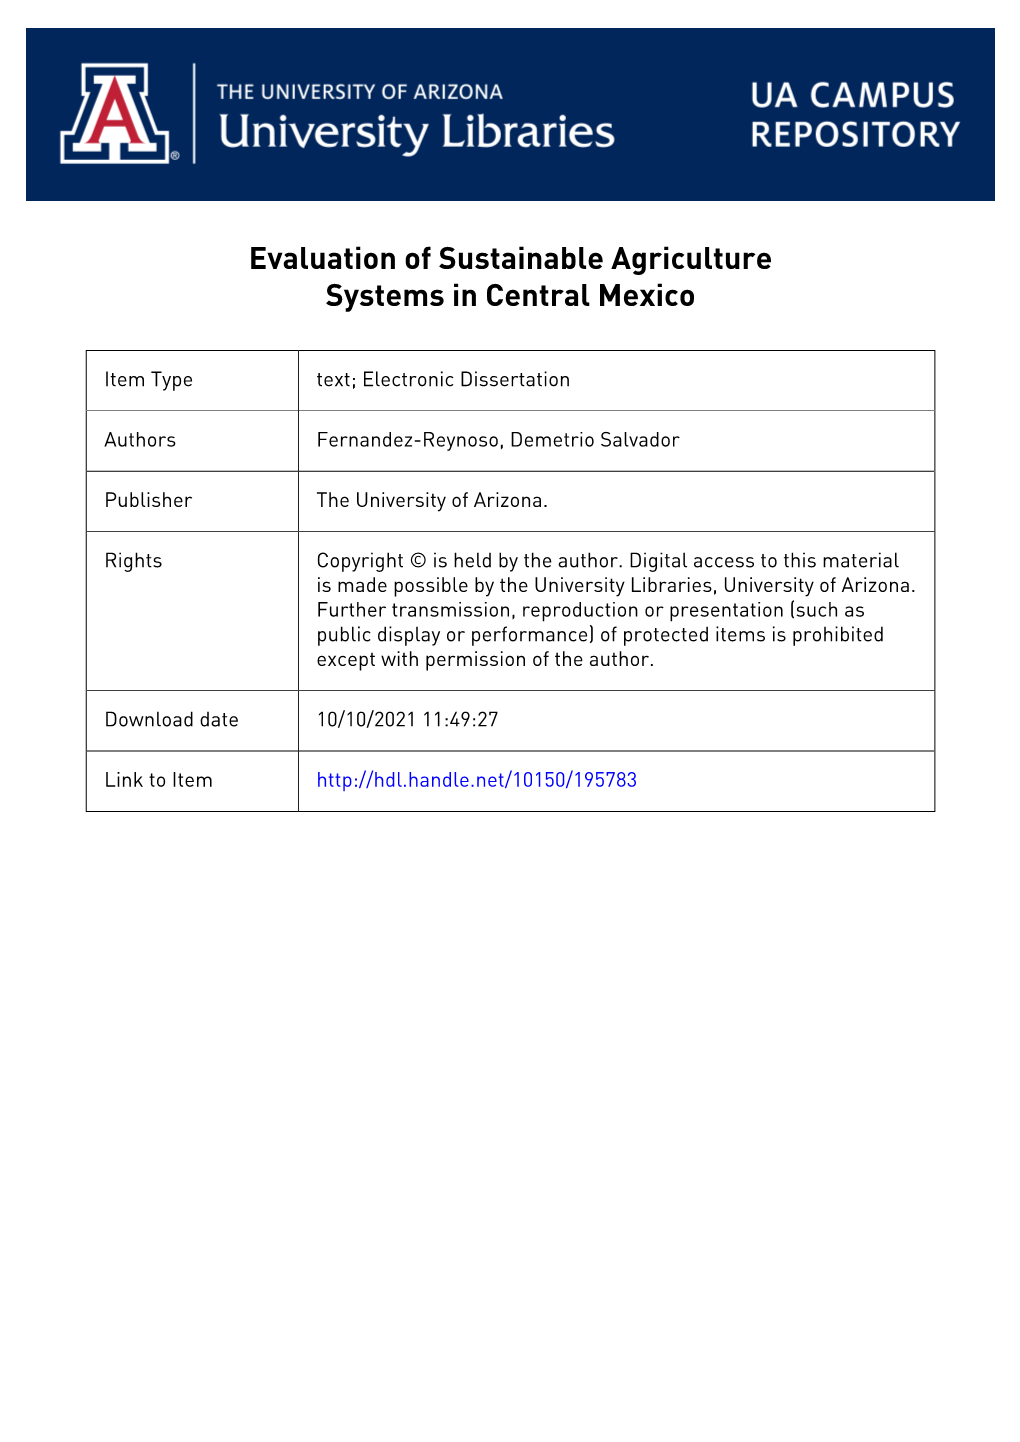 Evaluation of Sustainable Agriculture Systems in Central Mexico